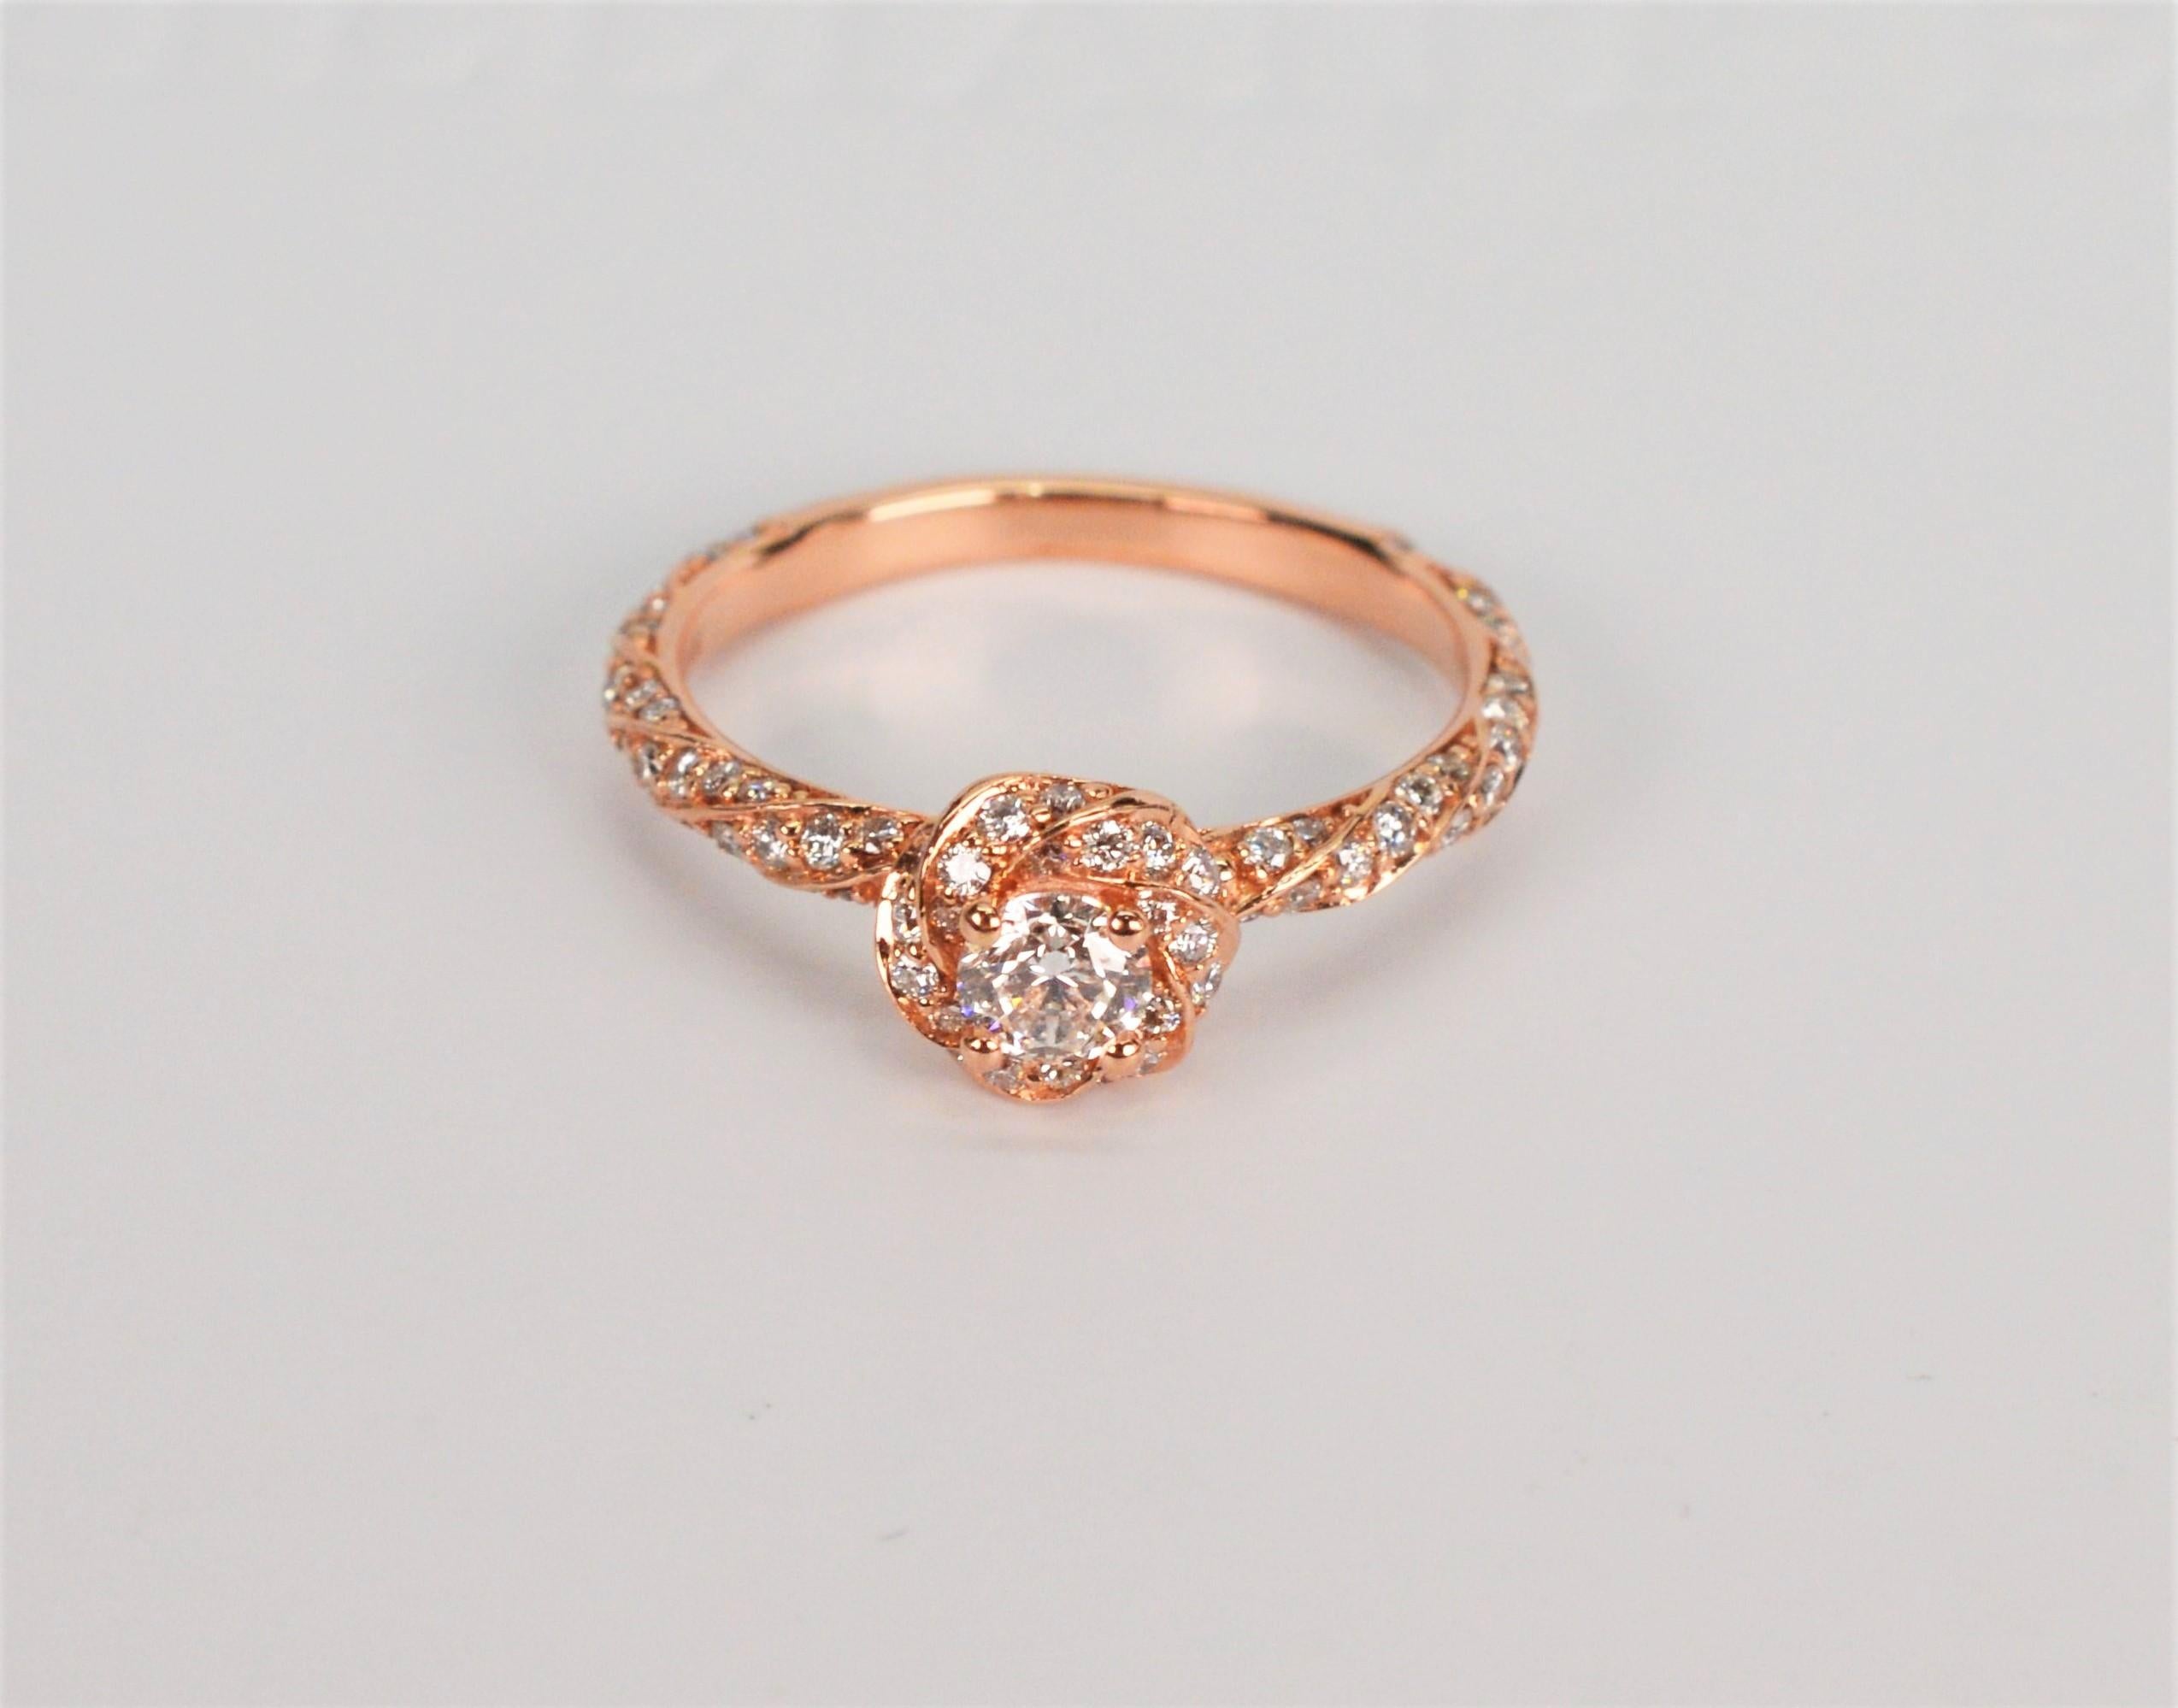 Brilliant Earth Diamond 14 Karat Rose Gold Engagement Ring w GIA Cert Box Papers For Sale 8